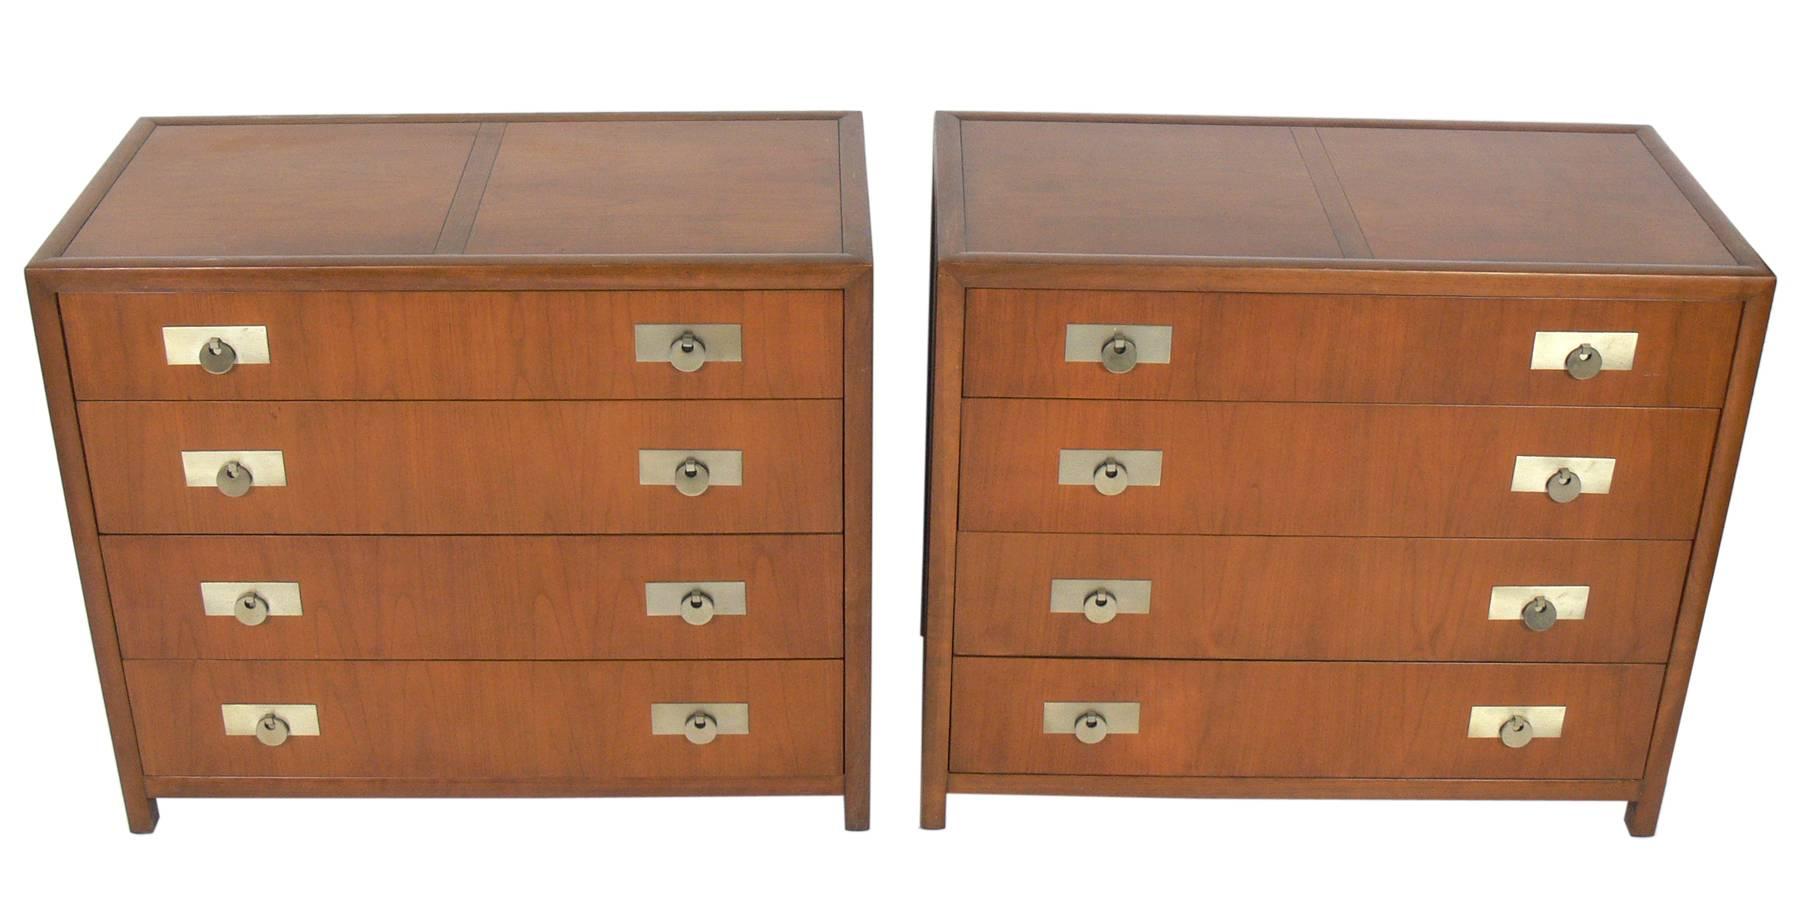 Pair of Asian influenced chests, designed by Michael Taylor for Baker, American, circa 1960s.